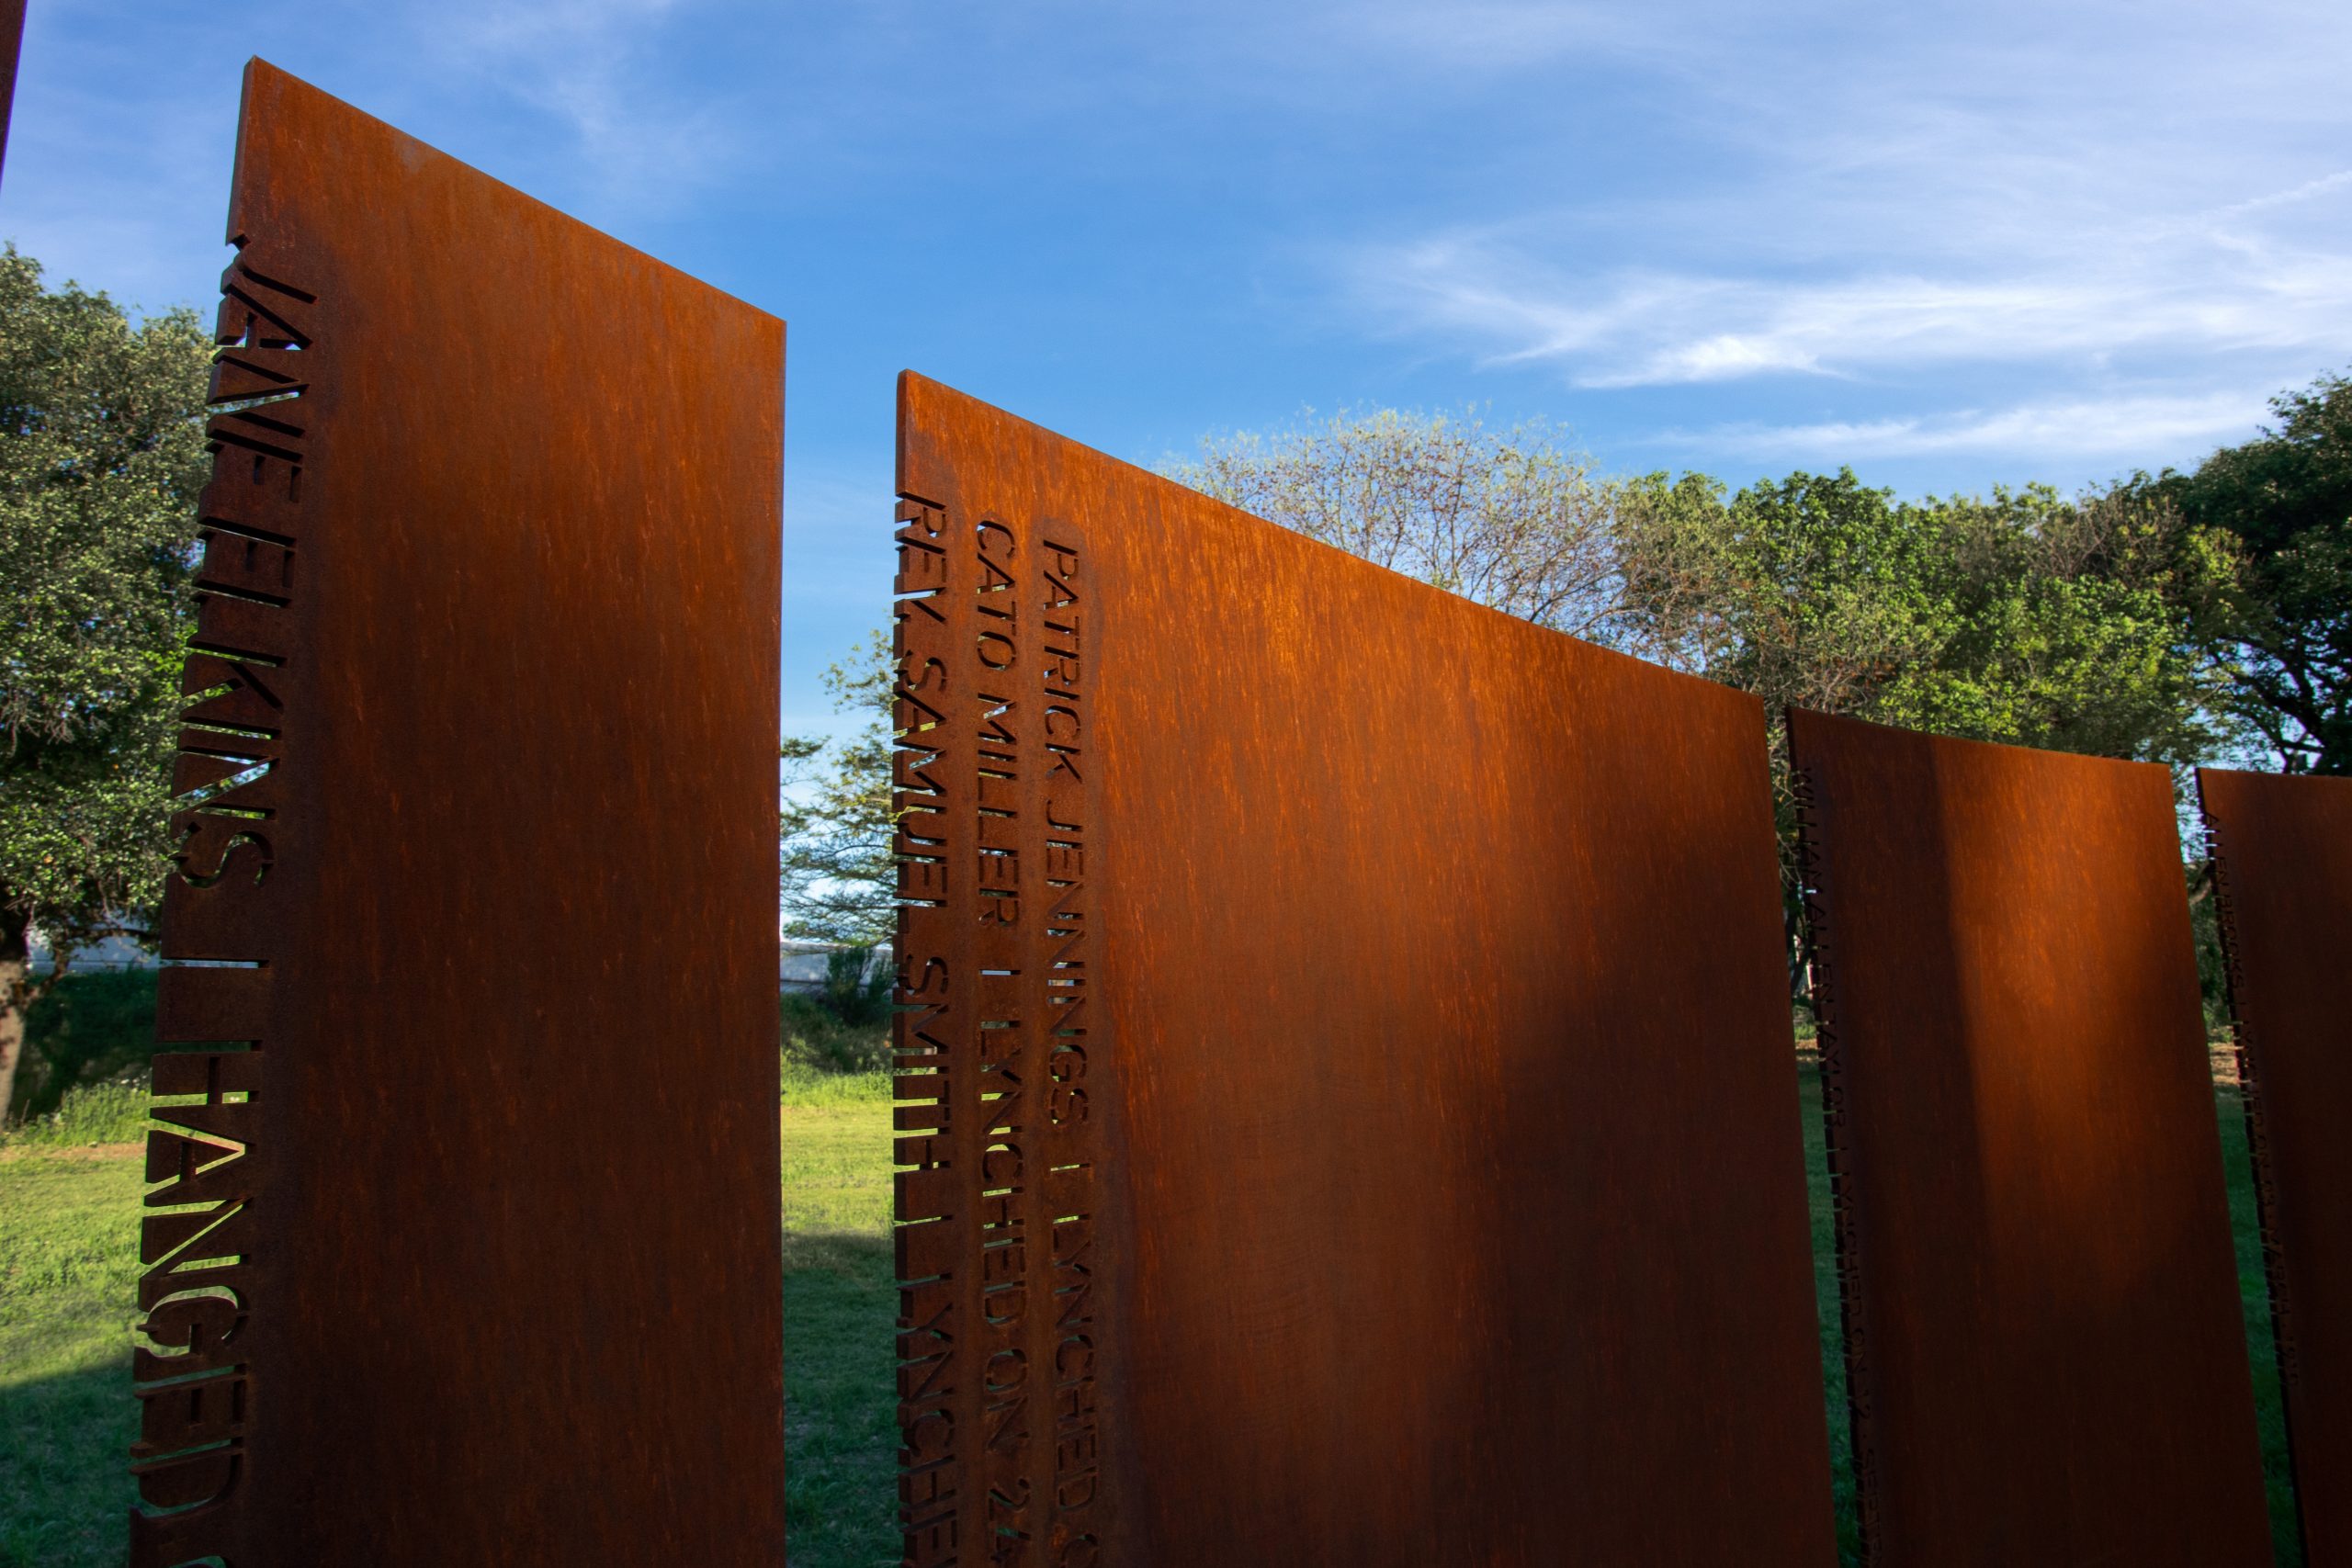 Shadow Lines, Memorial for the Victims of Racial Violence